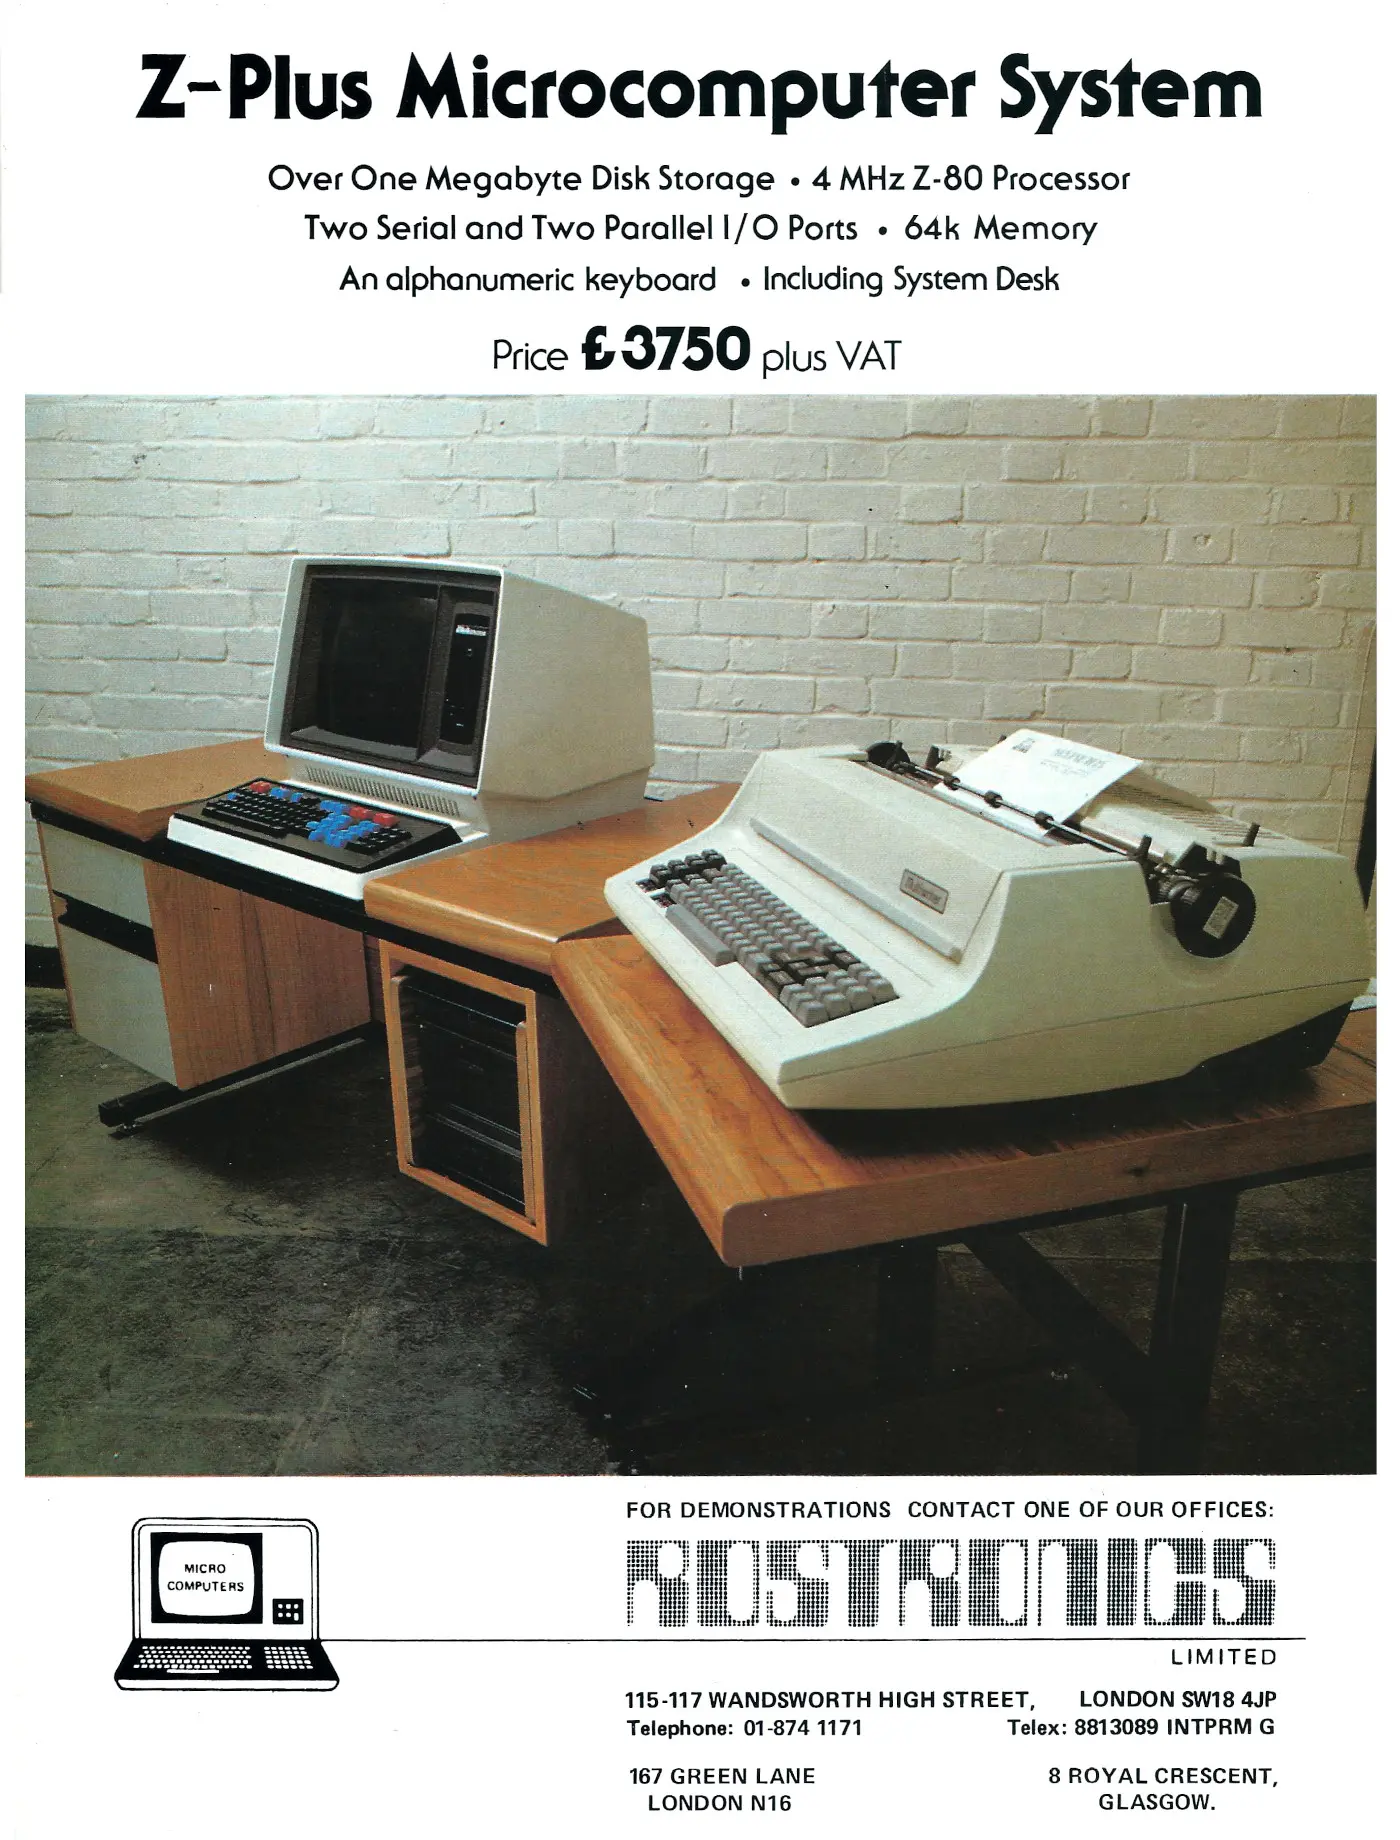 Micromation Advert: <b>Micromation Z-Plus Microcomputer System</b>, from Personal Computer World, January 1980